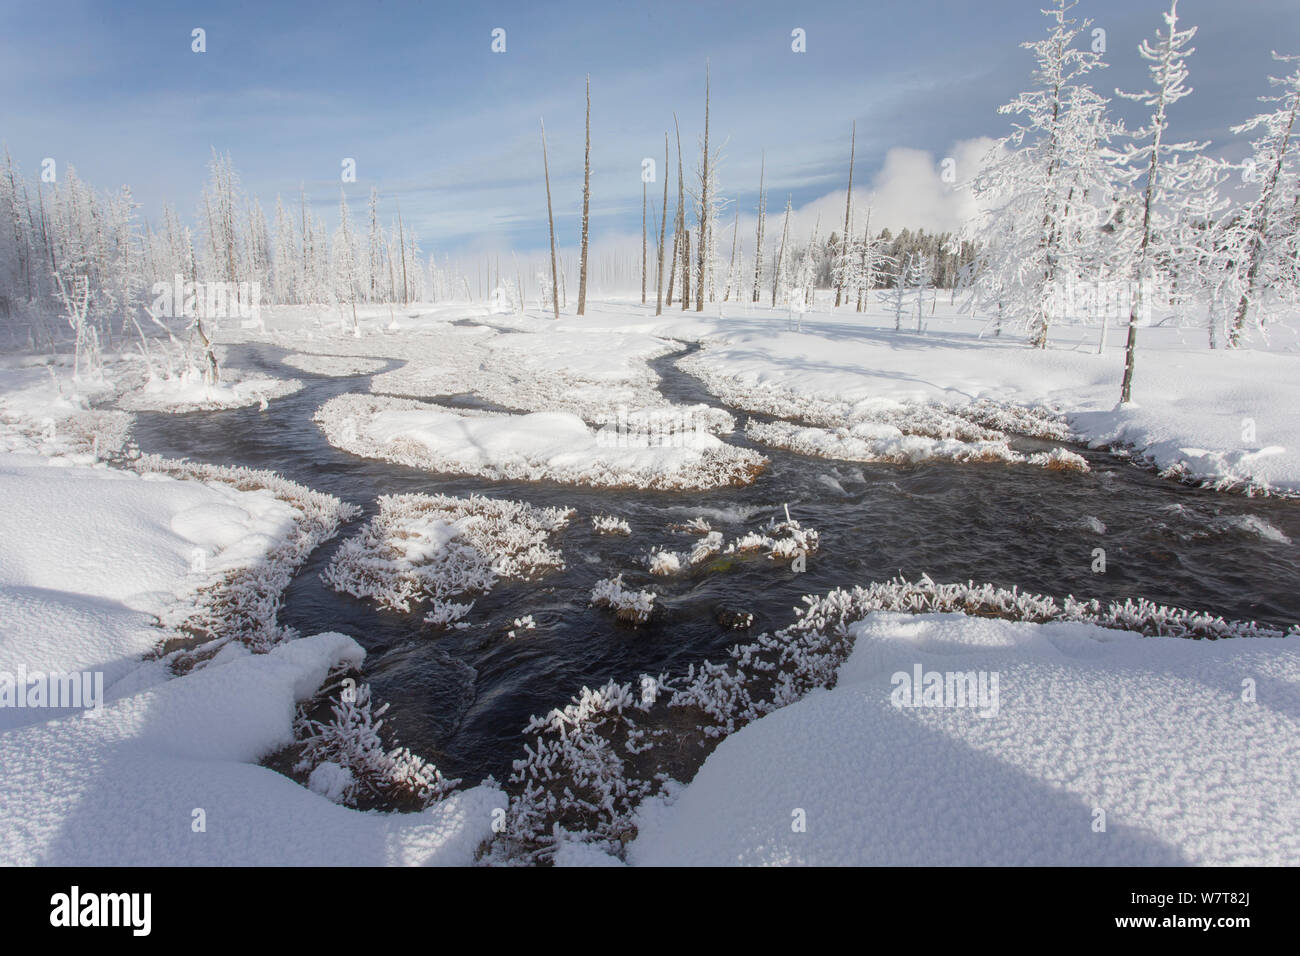 Calcified trees at Tangled Creek in winter, Yellowstone National Park, Wyoming, USA, February 2013. Stock Photo